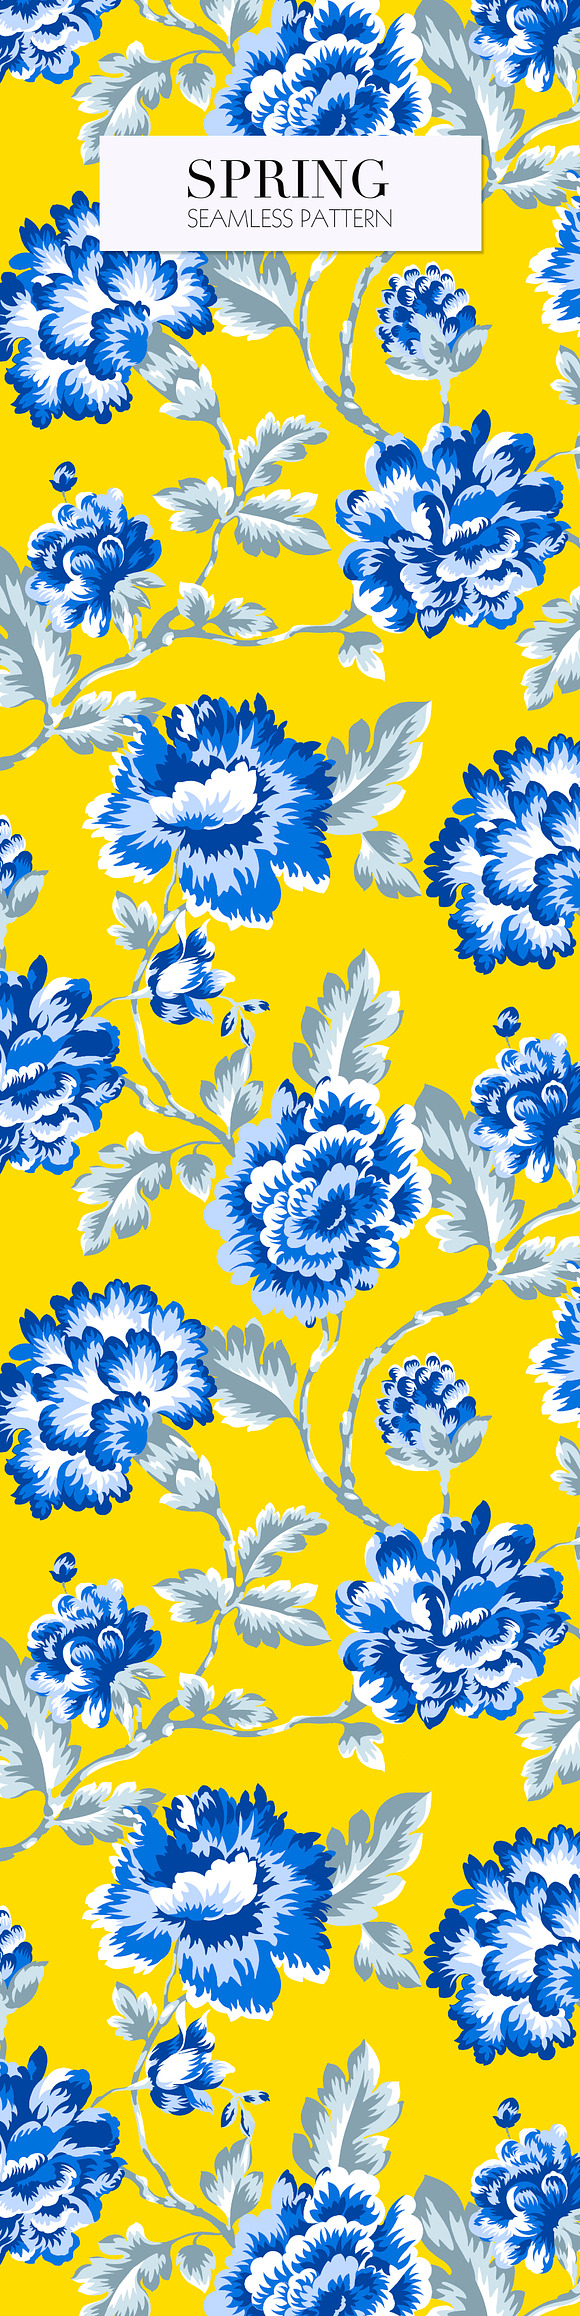 Spring Floral Pattern in Illustrations - product preview 5